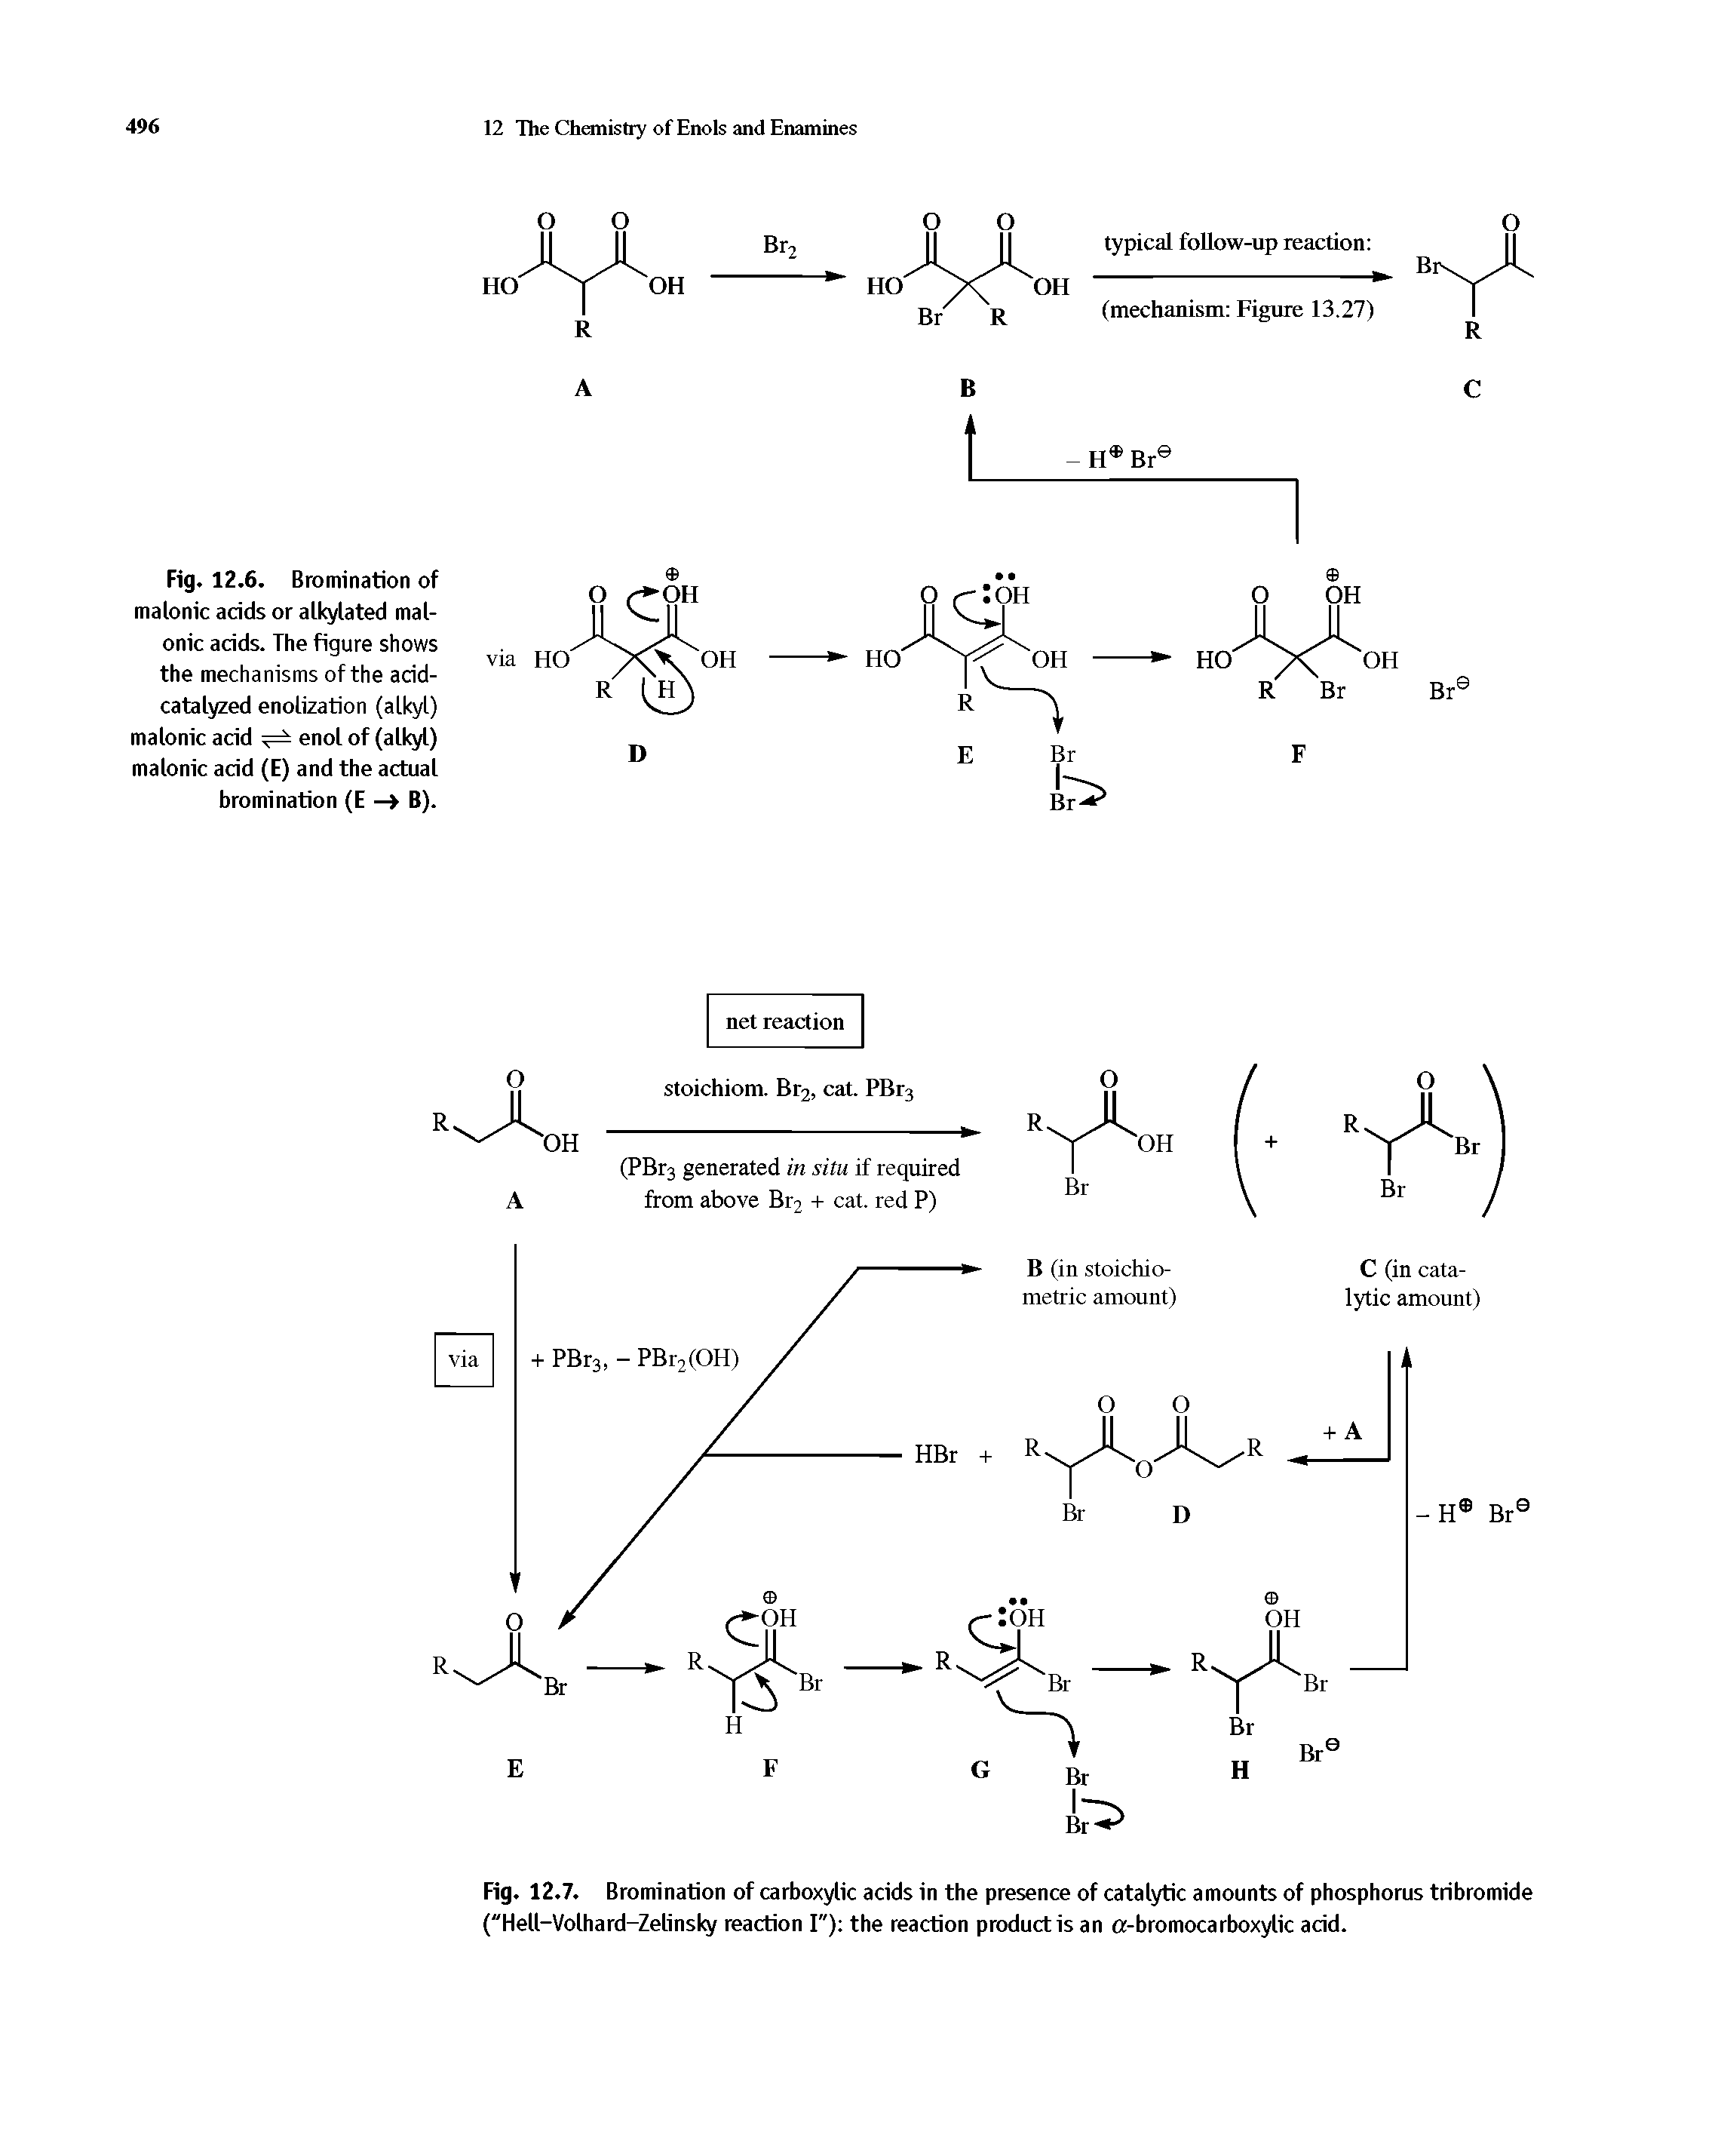 Fig. 12.6. Bromination of malonic acids or alkylated mal-onic acids. The figure shows the mechanisms of the acid-catalyzed enolization (alkyl) malonic acid enol of (alkyl) malonic acid (E) and the actual bromination (E —> B).